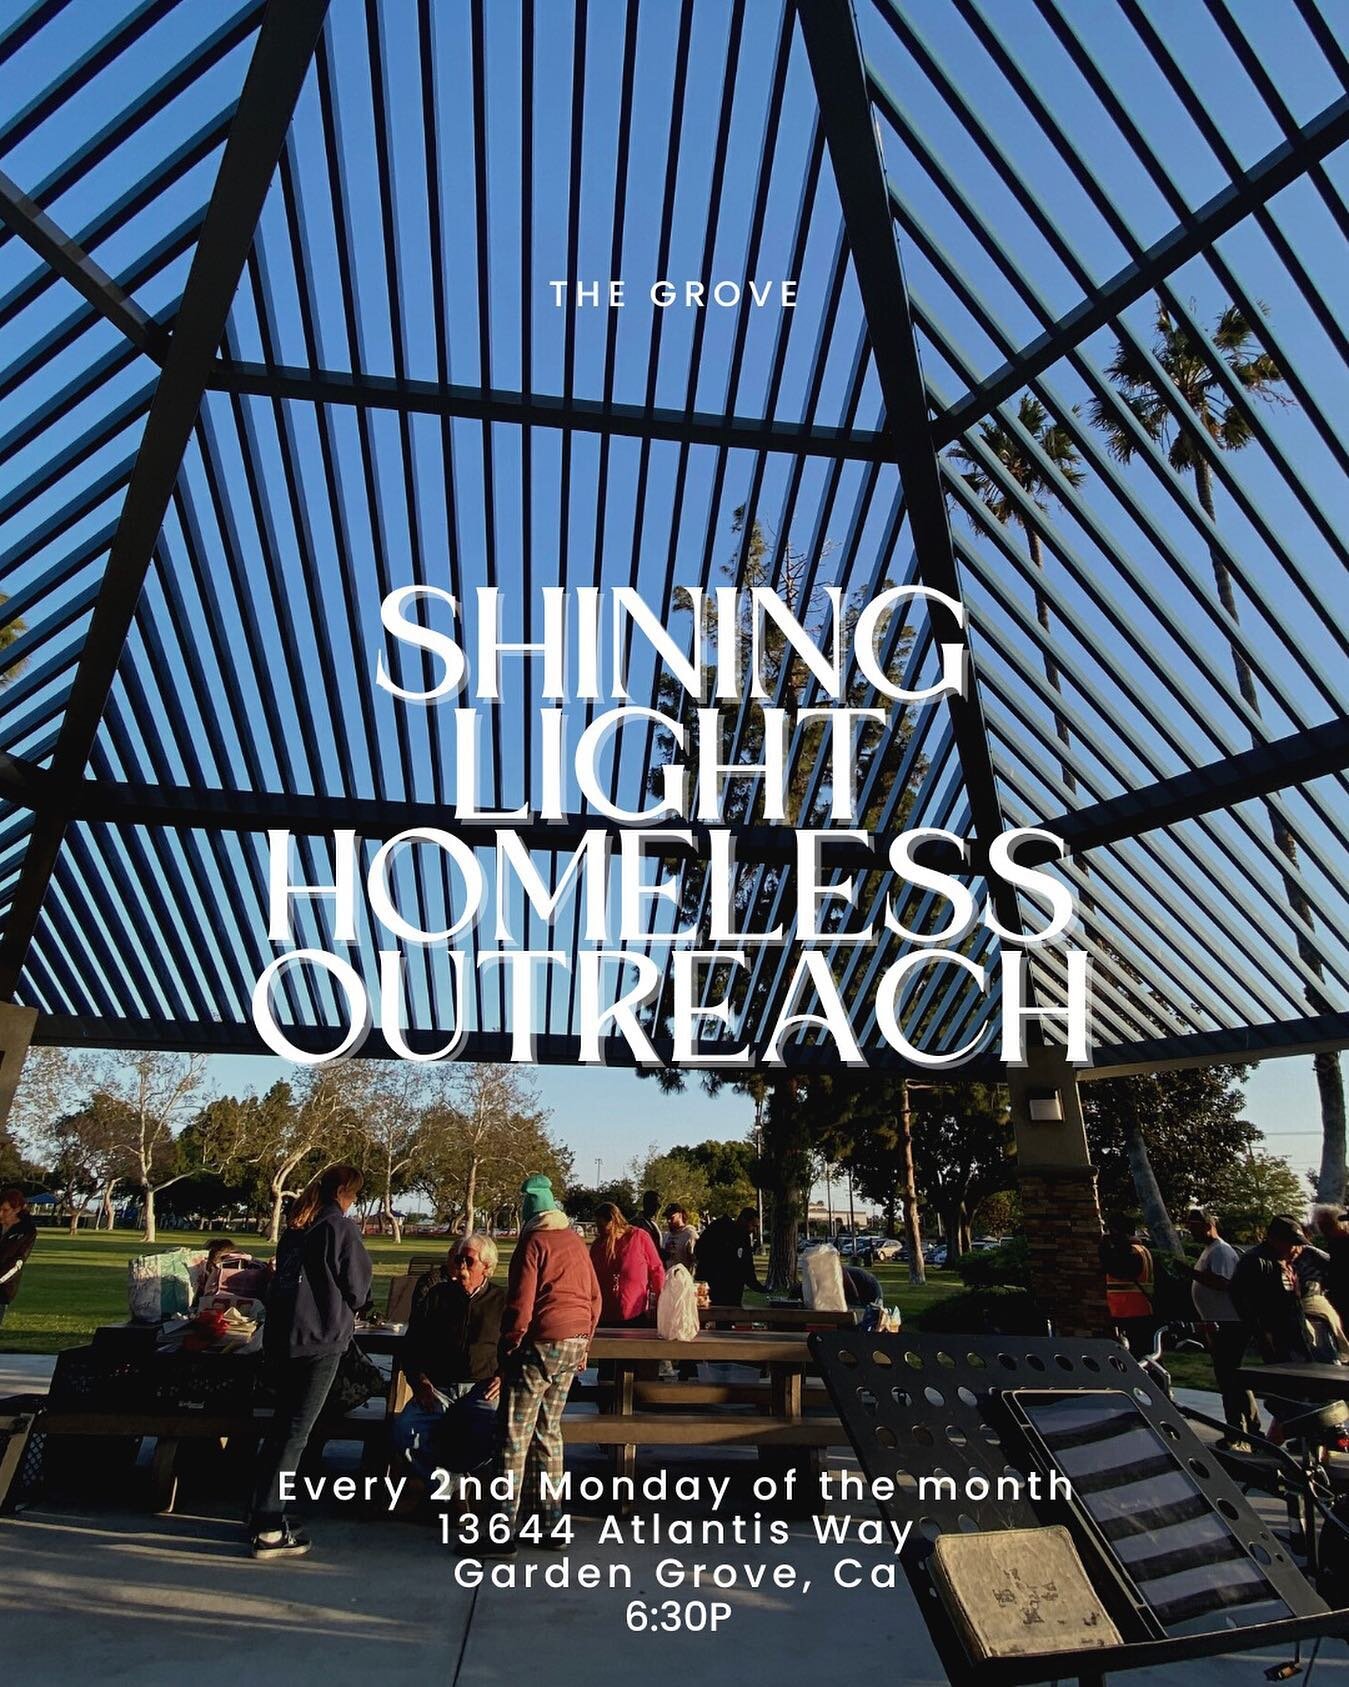 💡SHINING LIGHT💡

Come on out every 2nd Monday of the month at 6:30P to join serving the homeless in our city of Garden Grove. This ministry supports homeless by providing them a hot meal, dessert, hygiene essentials, fellowship, and most importantl